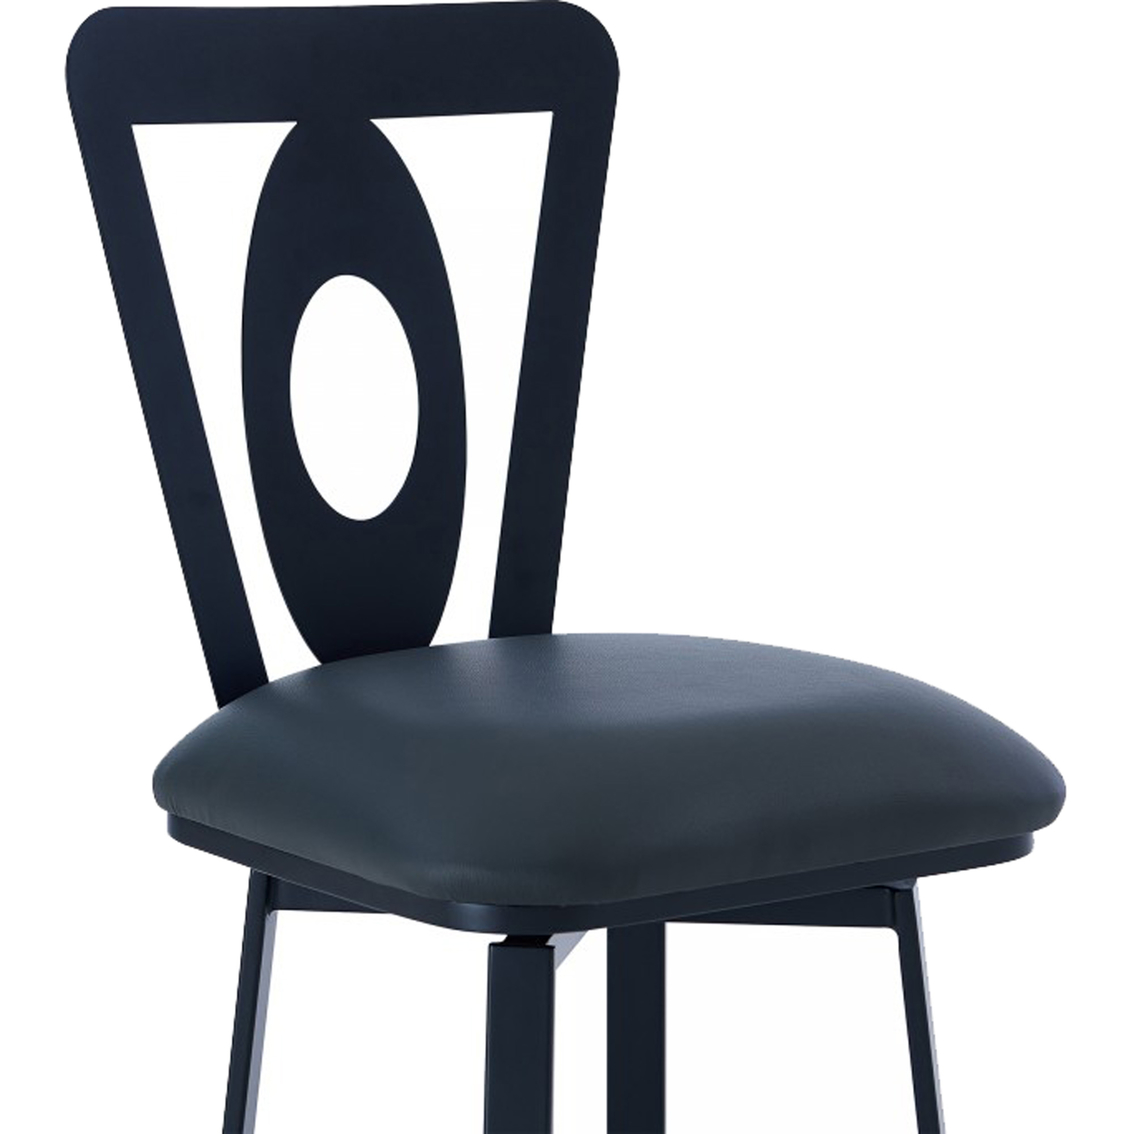 Armen Living Lola Barstool in Matte Black Finish and Grey Faux Leather - Image 4 of 7